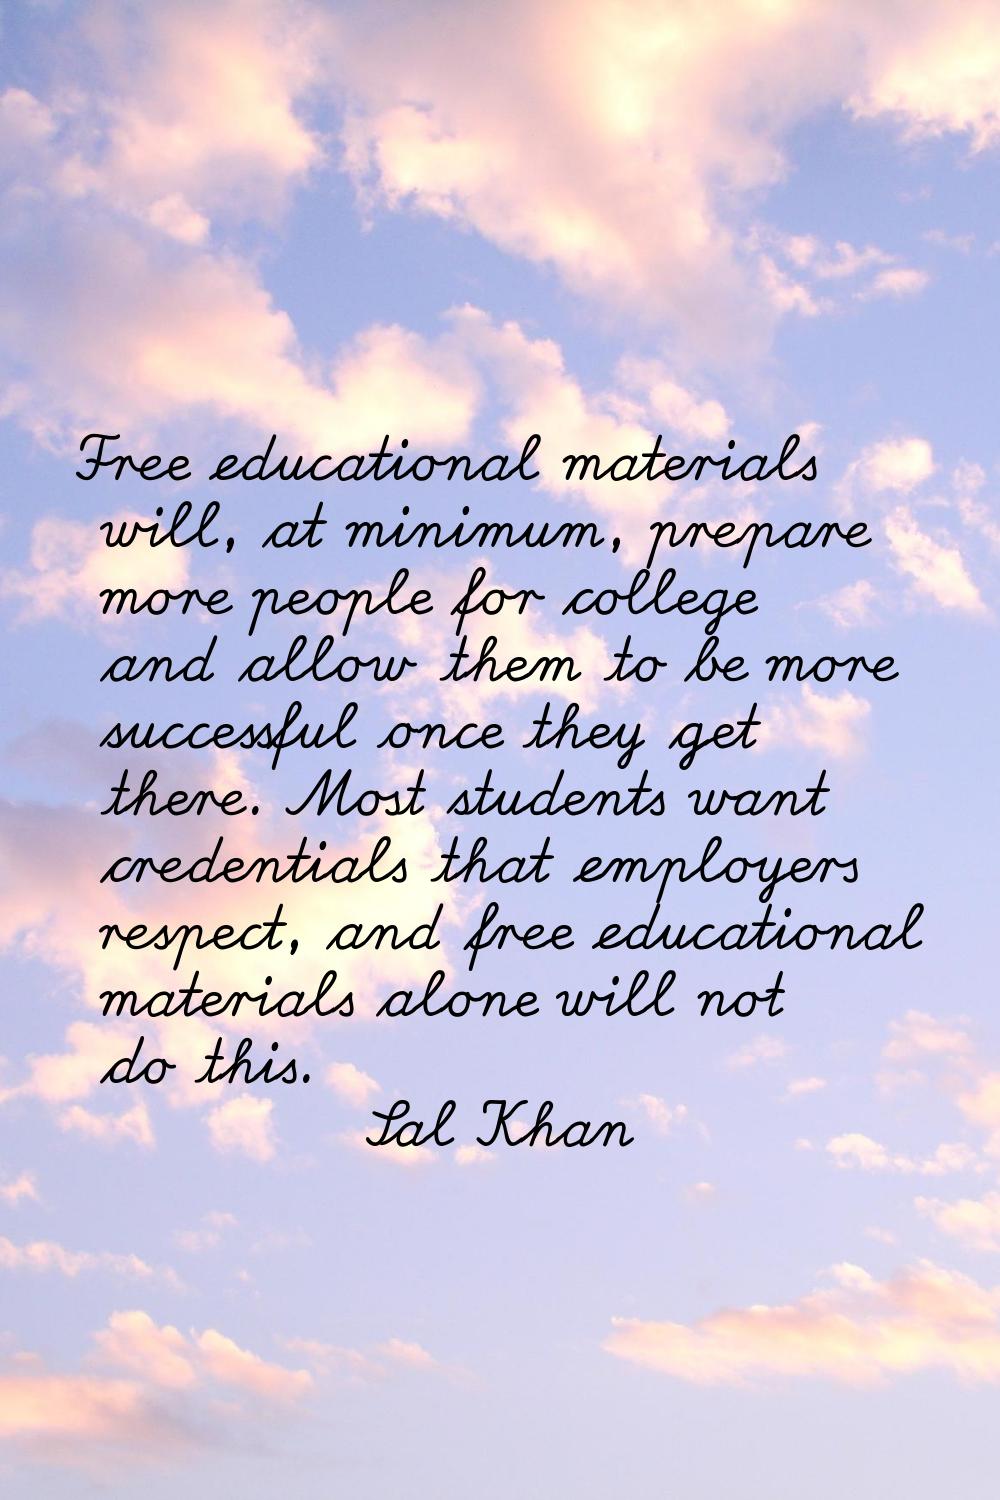 Free educational materials will, at minimum, prepare more people for college and allow them to be m